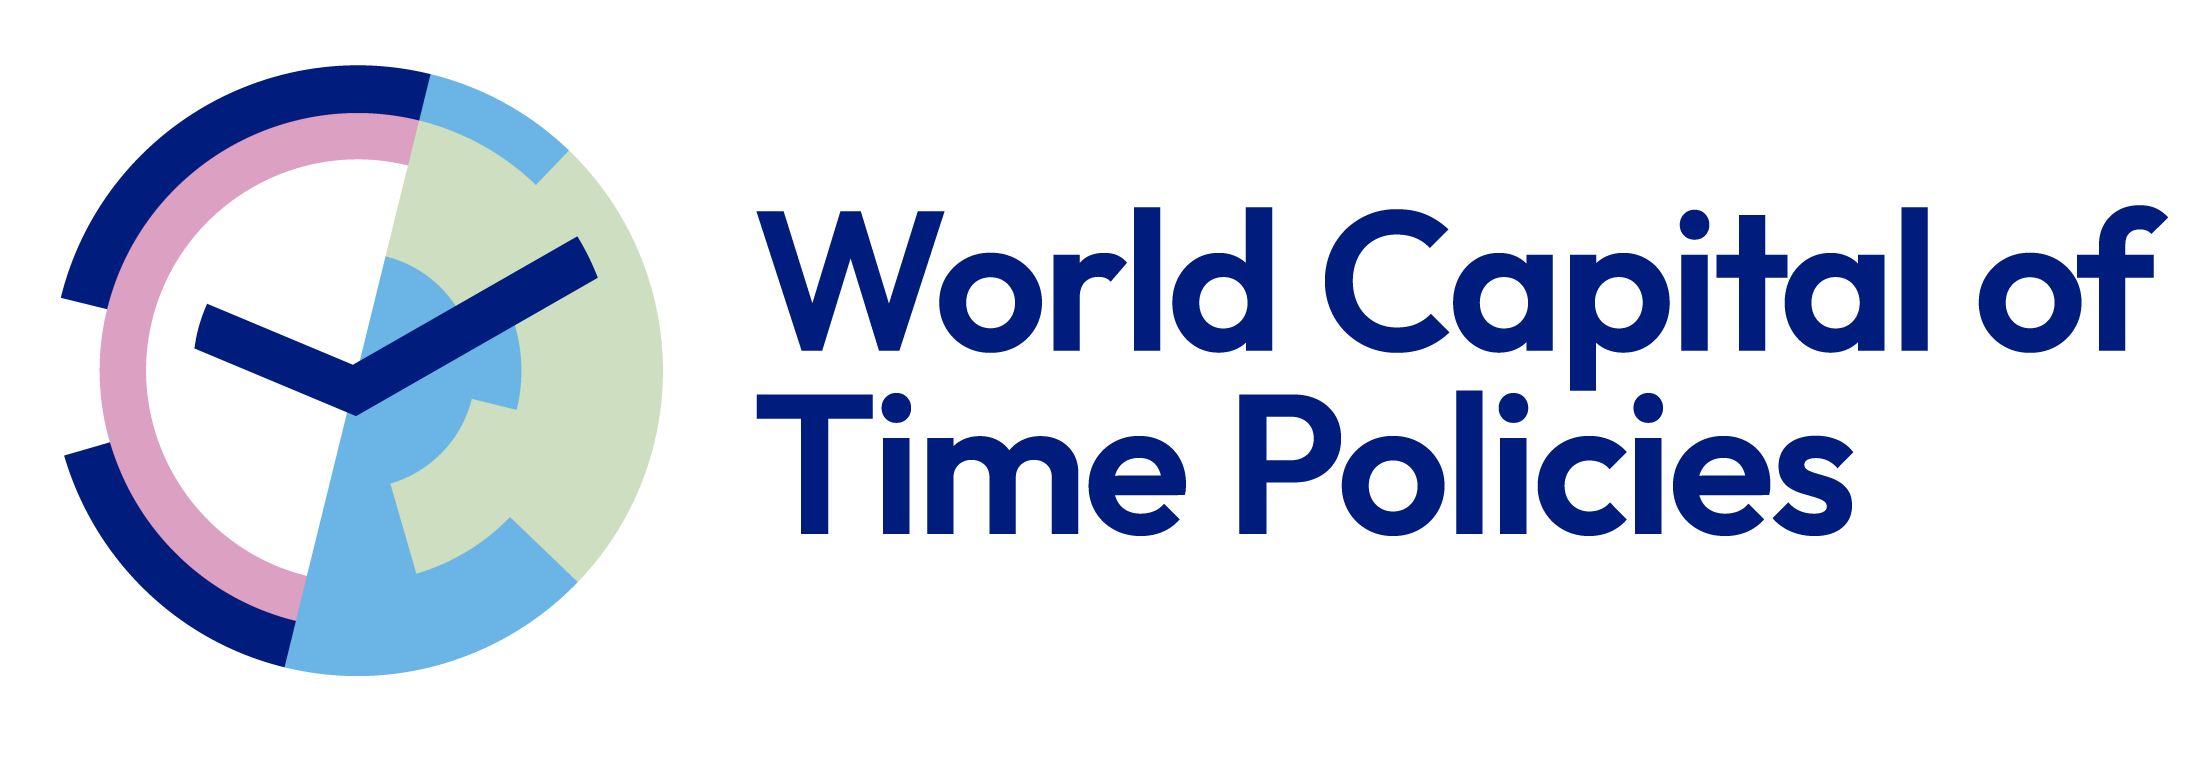 world capital of time policies logo